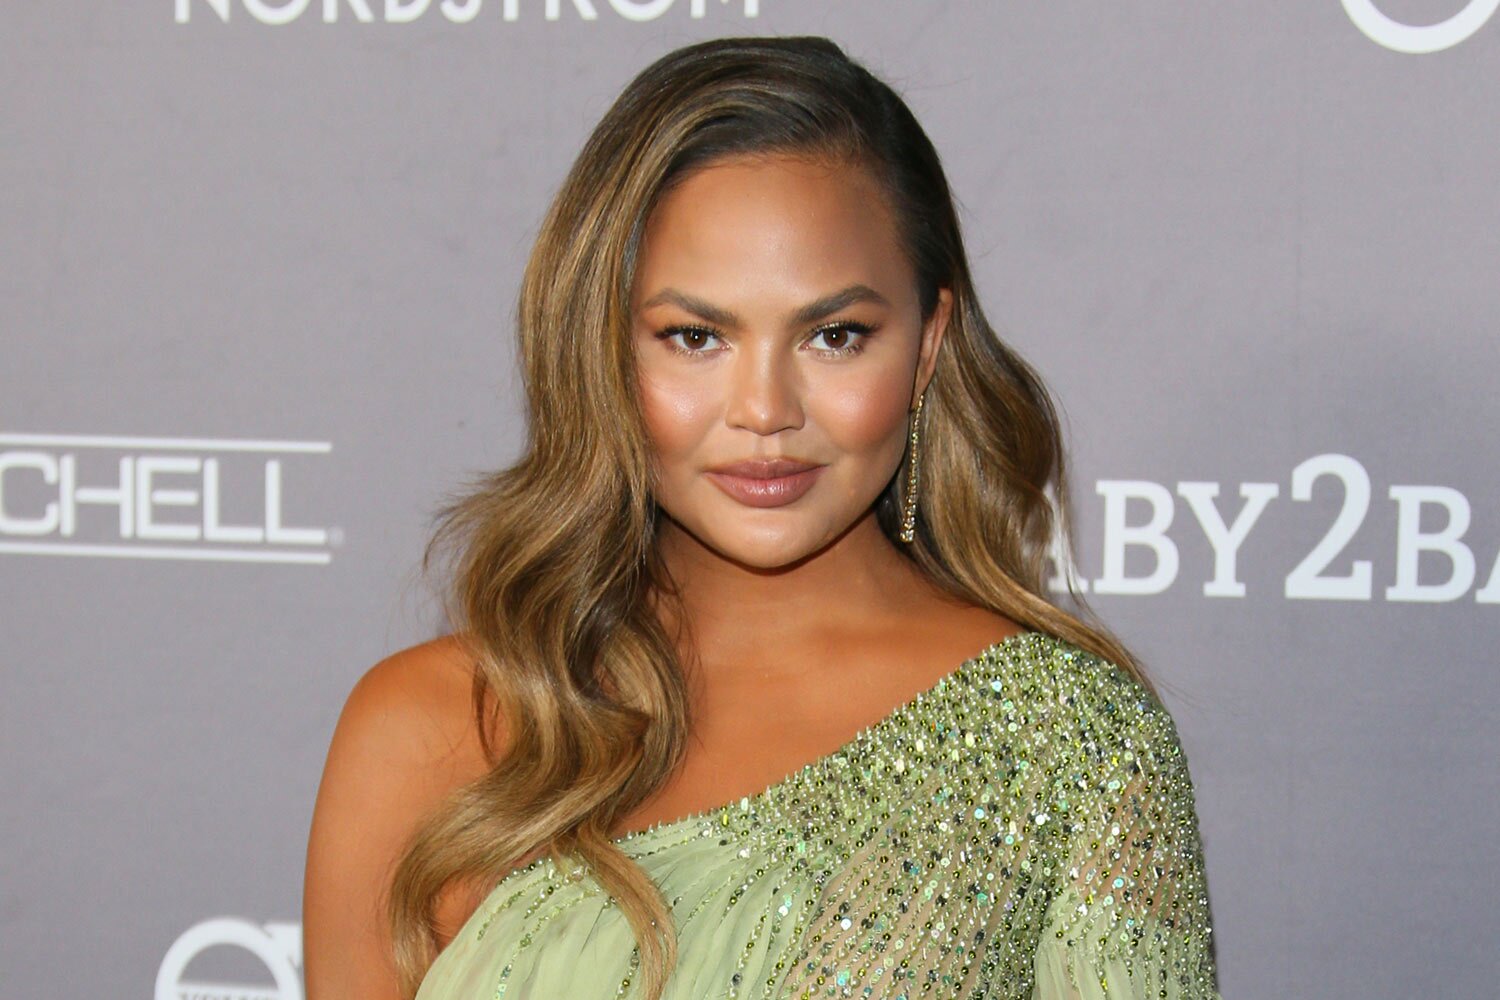 Chrissy Teigen Wife Of John Legend Reaches Her Personal Sobriety Milestone in the Wake of Past Controversies!